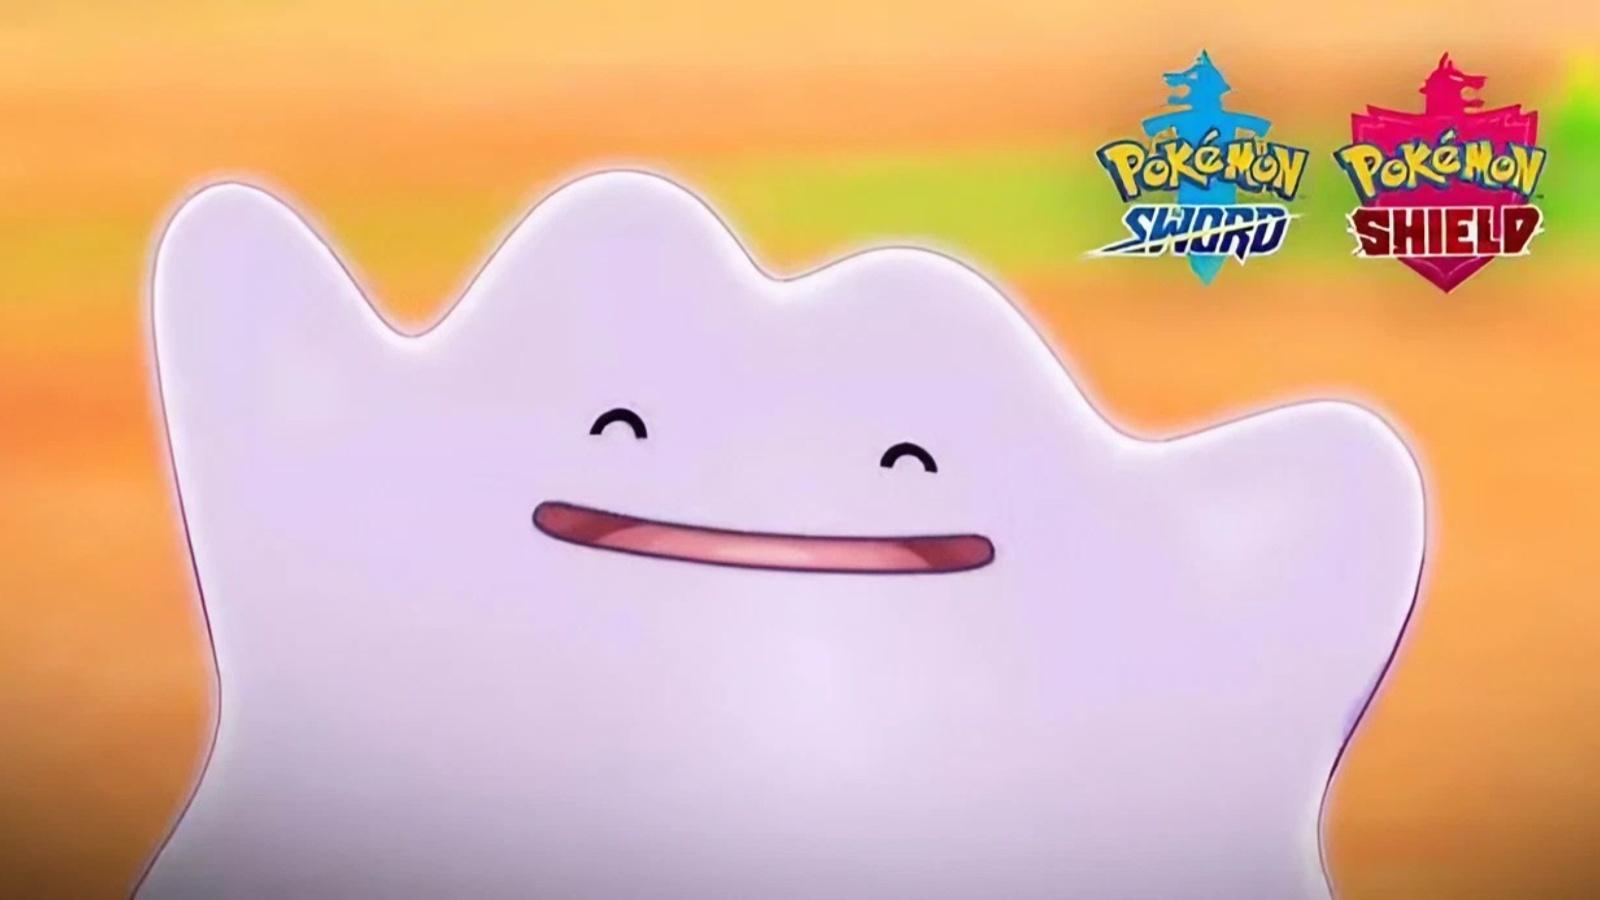 Ditto is a frequently traded Pokemon in Sword and Shield.